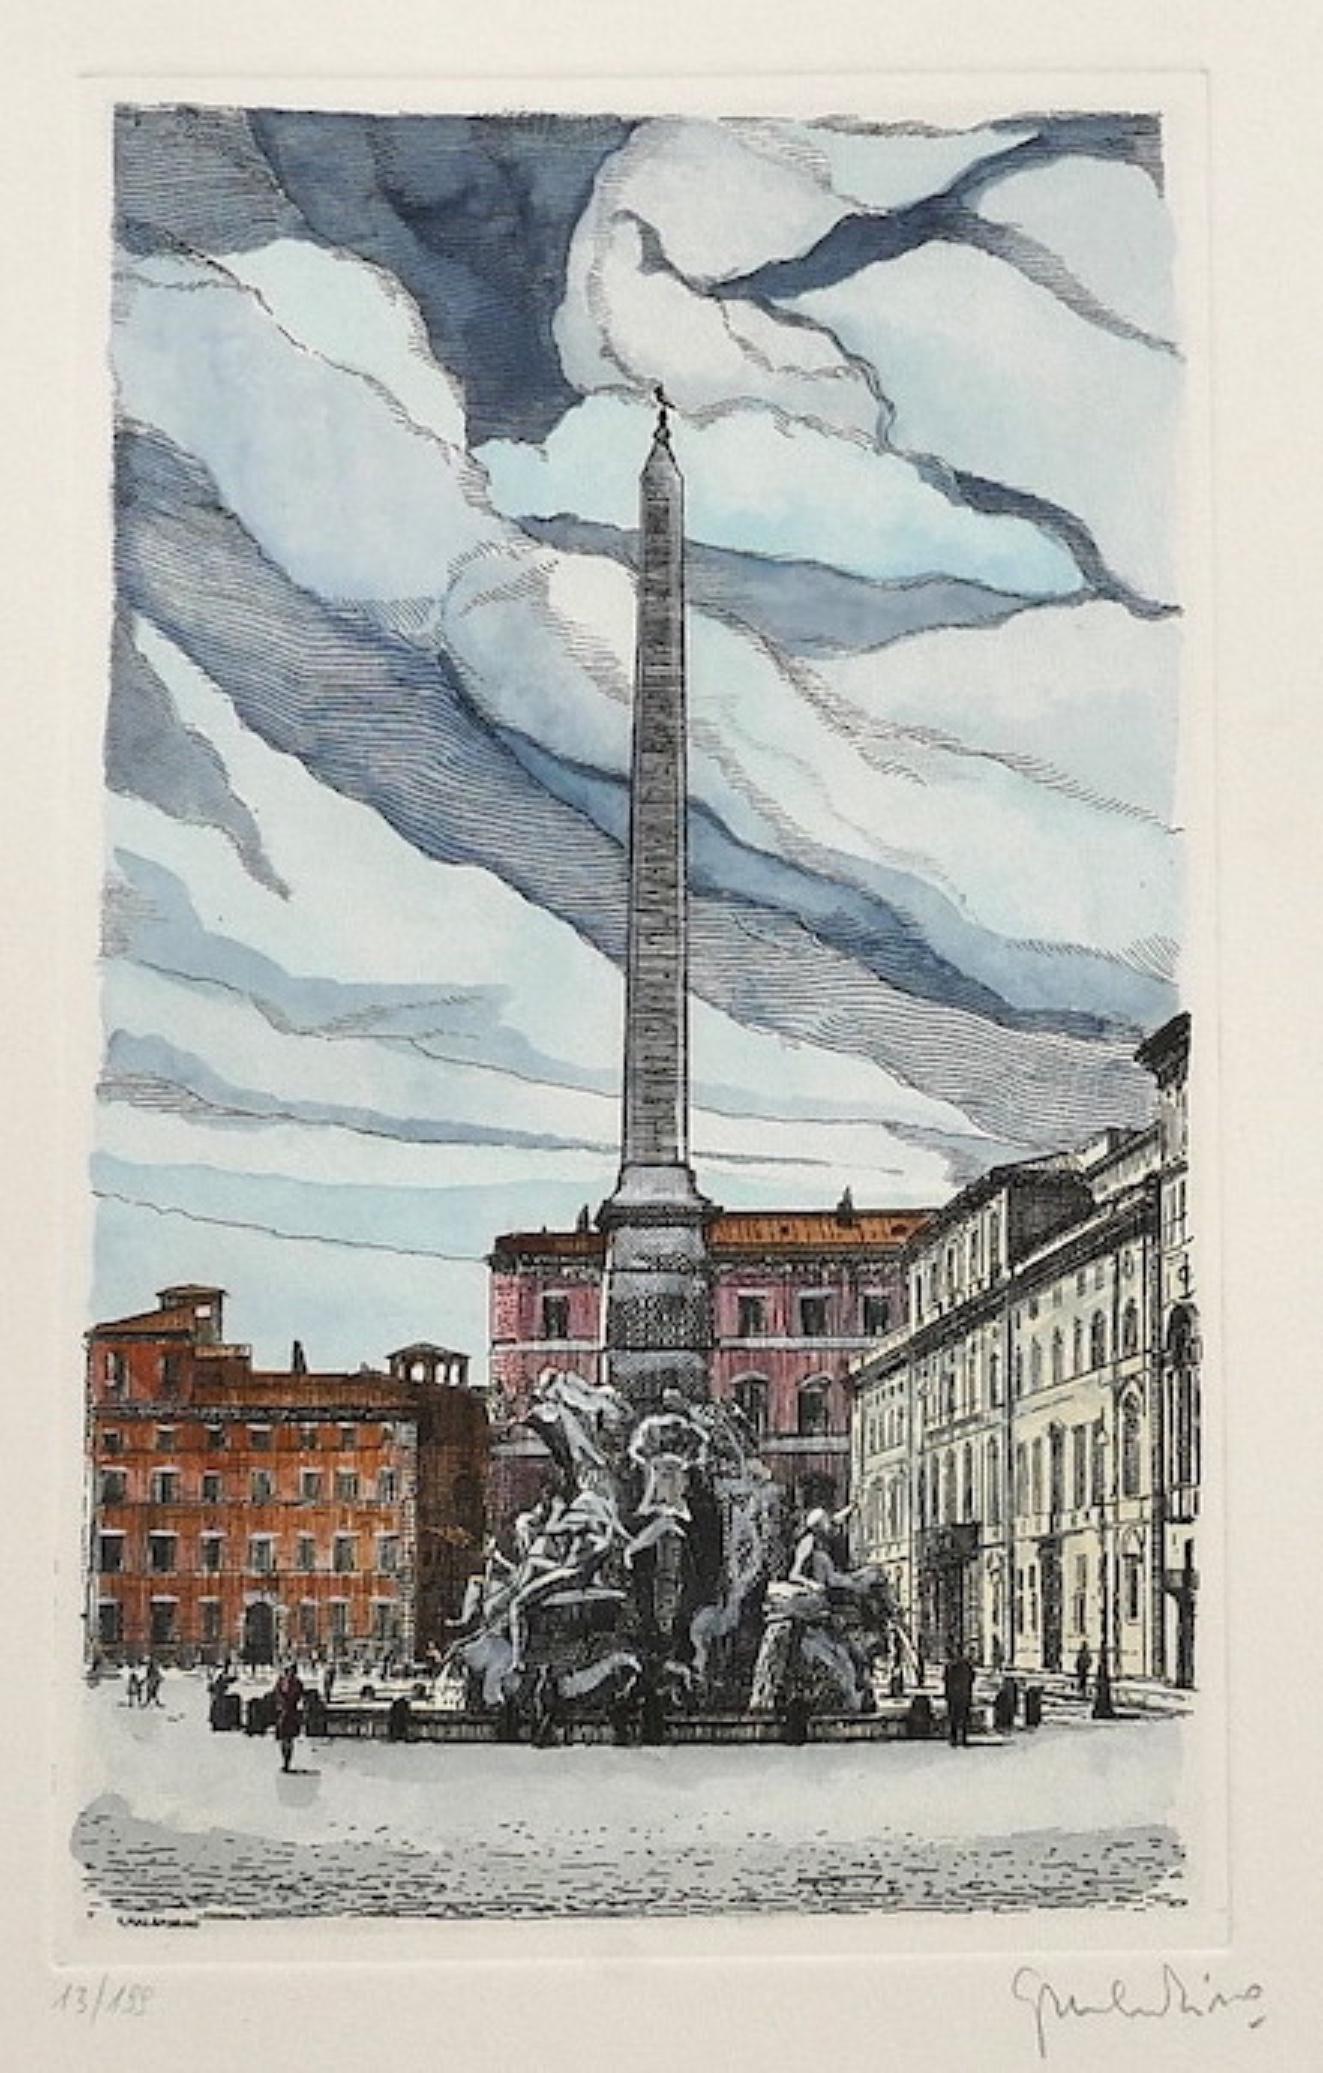 Navona Square - Rome is an original artwork realized by Giuseppe Malandrino.

Original print in etching technique.

Hand-signed by the artist in pencil on the lower right corner. Numbered on the lower-left corner. Edition 13/199.

Image Dimensions: